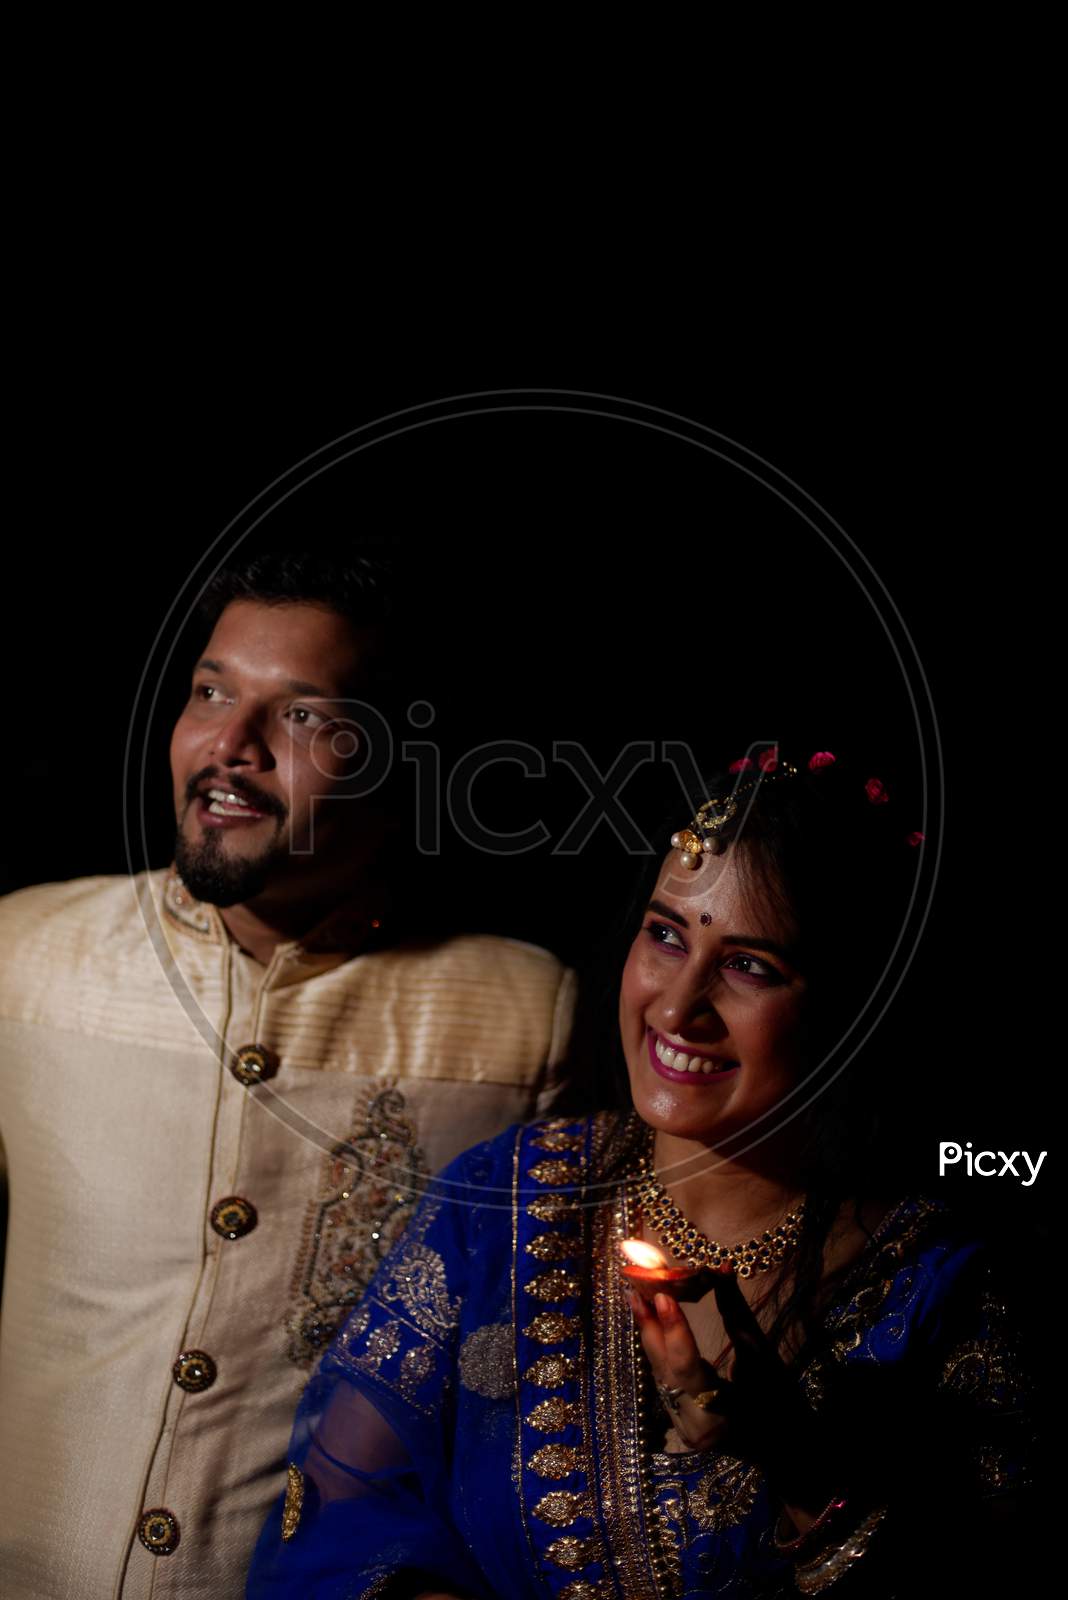 Young and beautiful Indian Gujarati couple in Indian traditional dress celebrating Diwali with diyas/lamps on the terrace in darkness on Diwali evening. Indian lifestyle and Diwali celebration